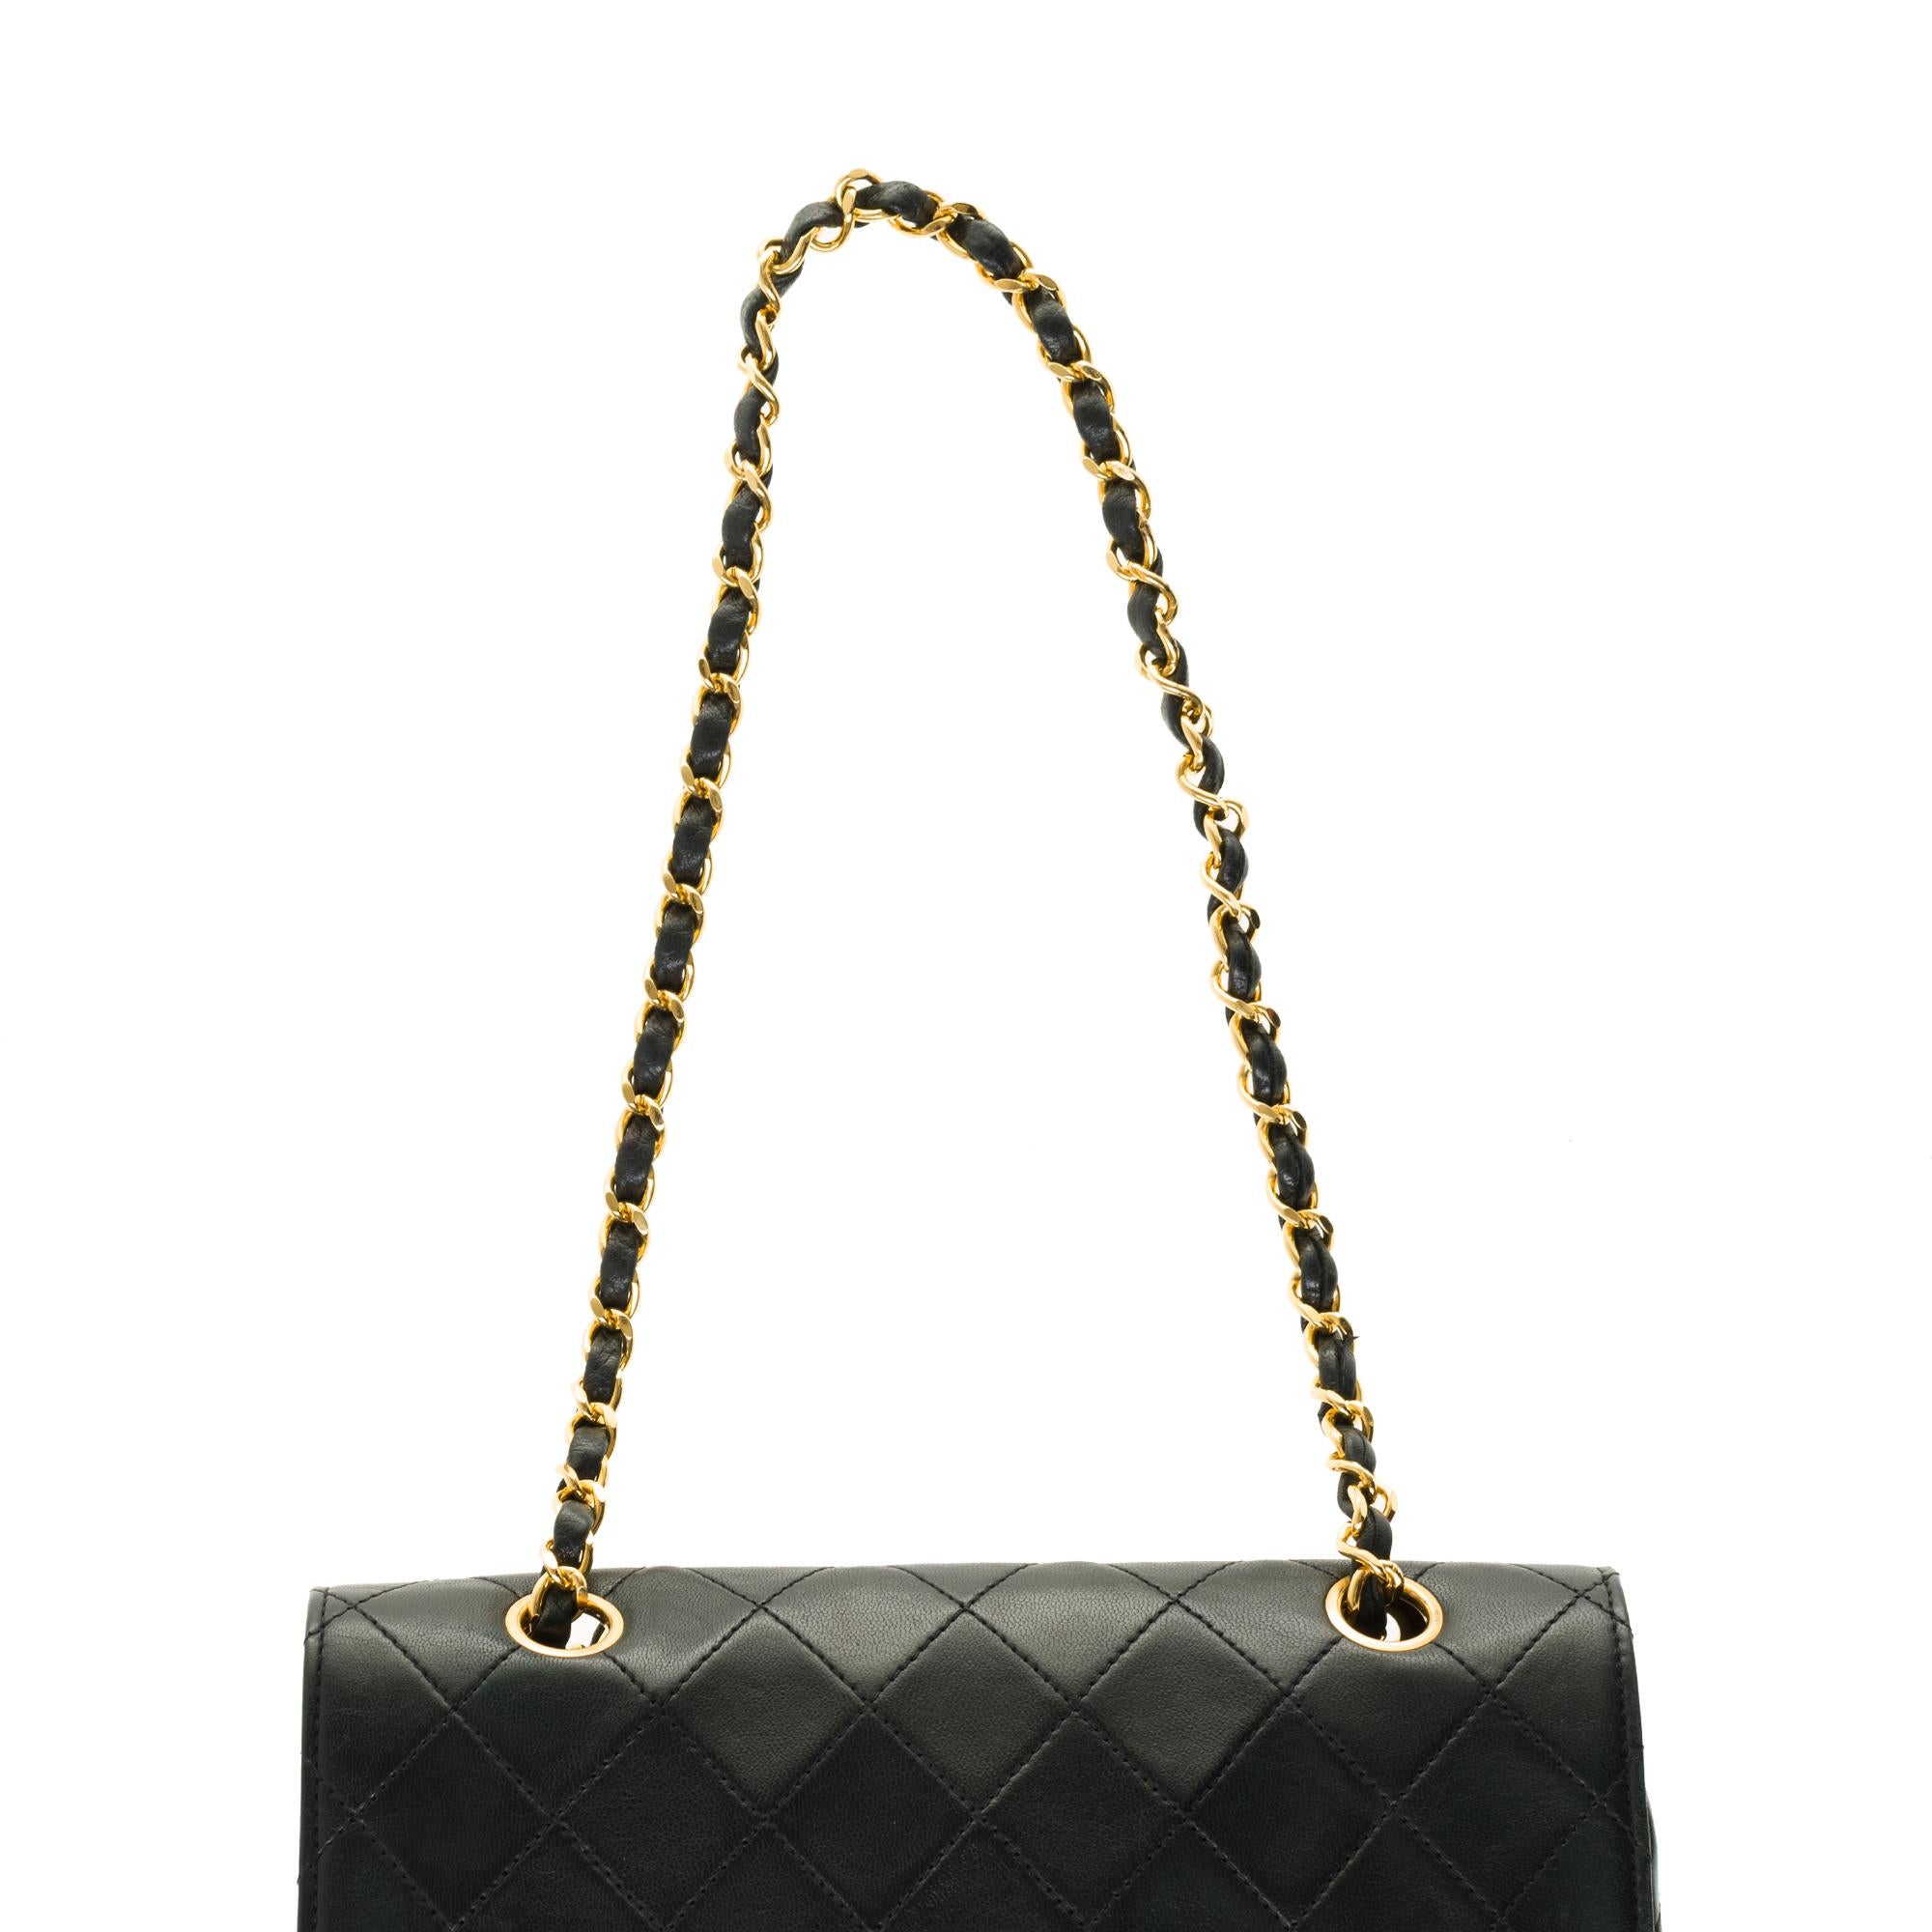 Women's Stunning Chanel Classic Shoulder bag in black quilted lambskin and gold hardware